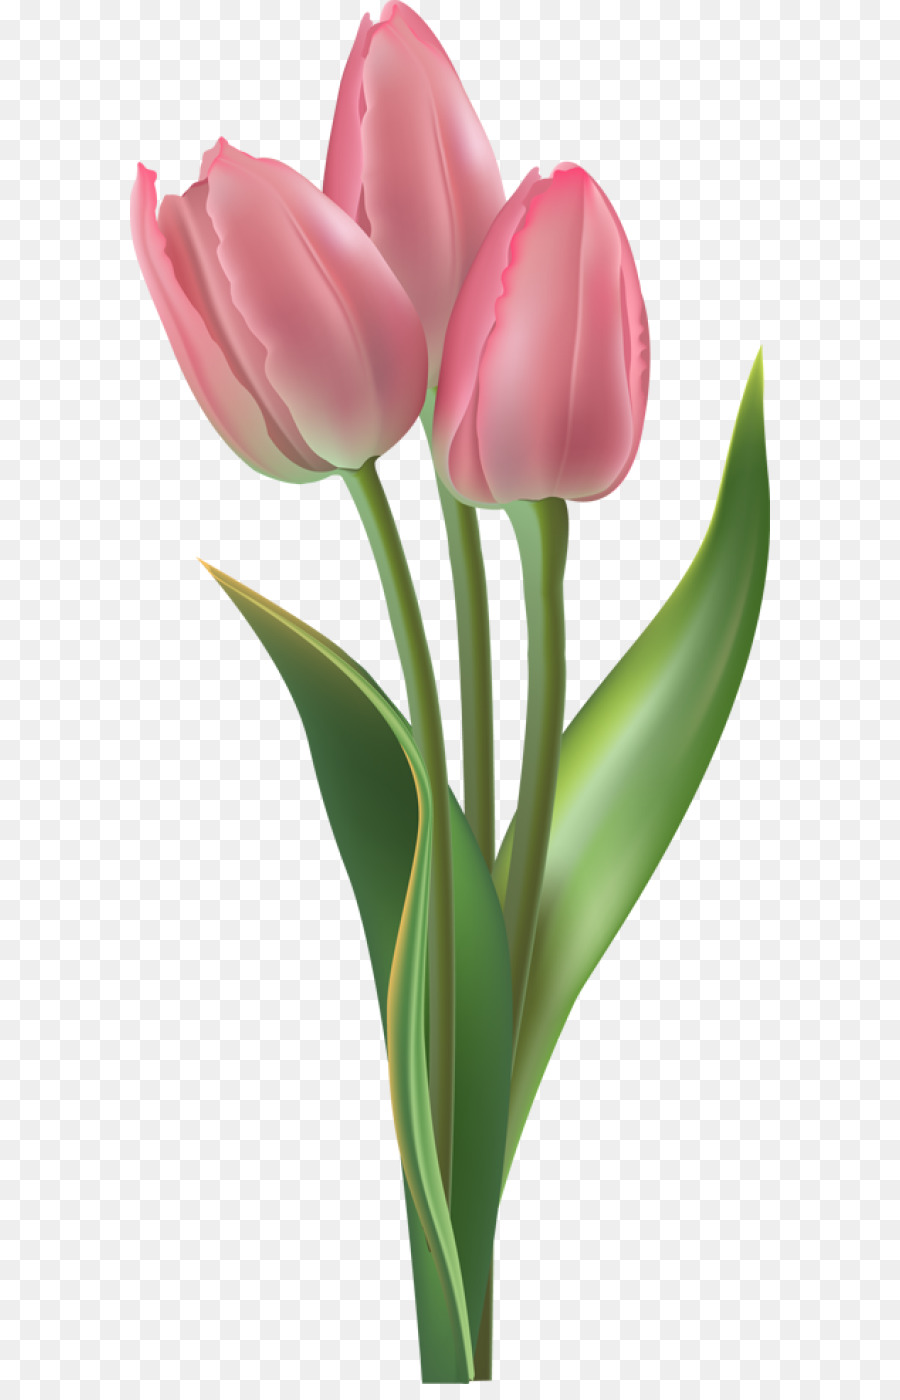 Free Tulips Transparent Background, Download Free Tulips Transparent ...